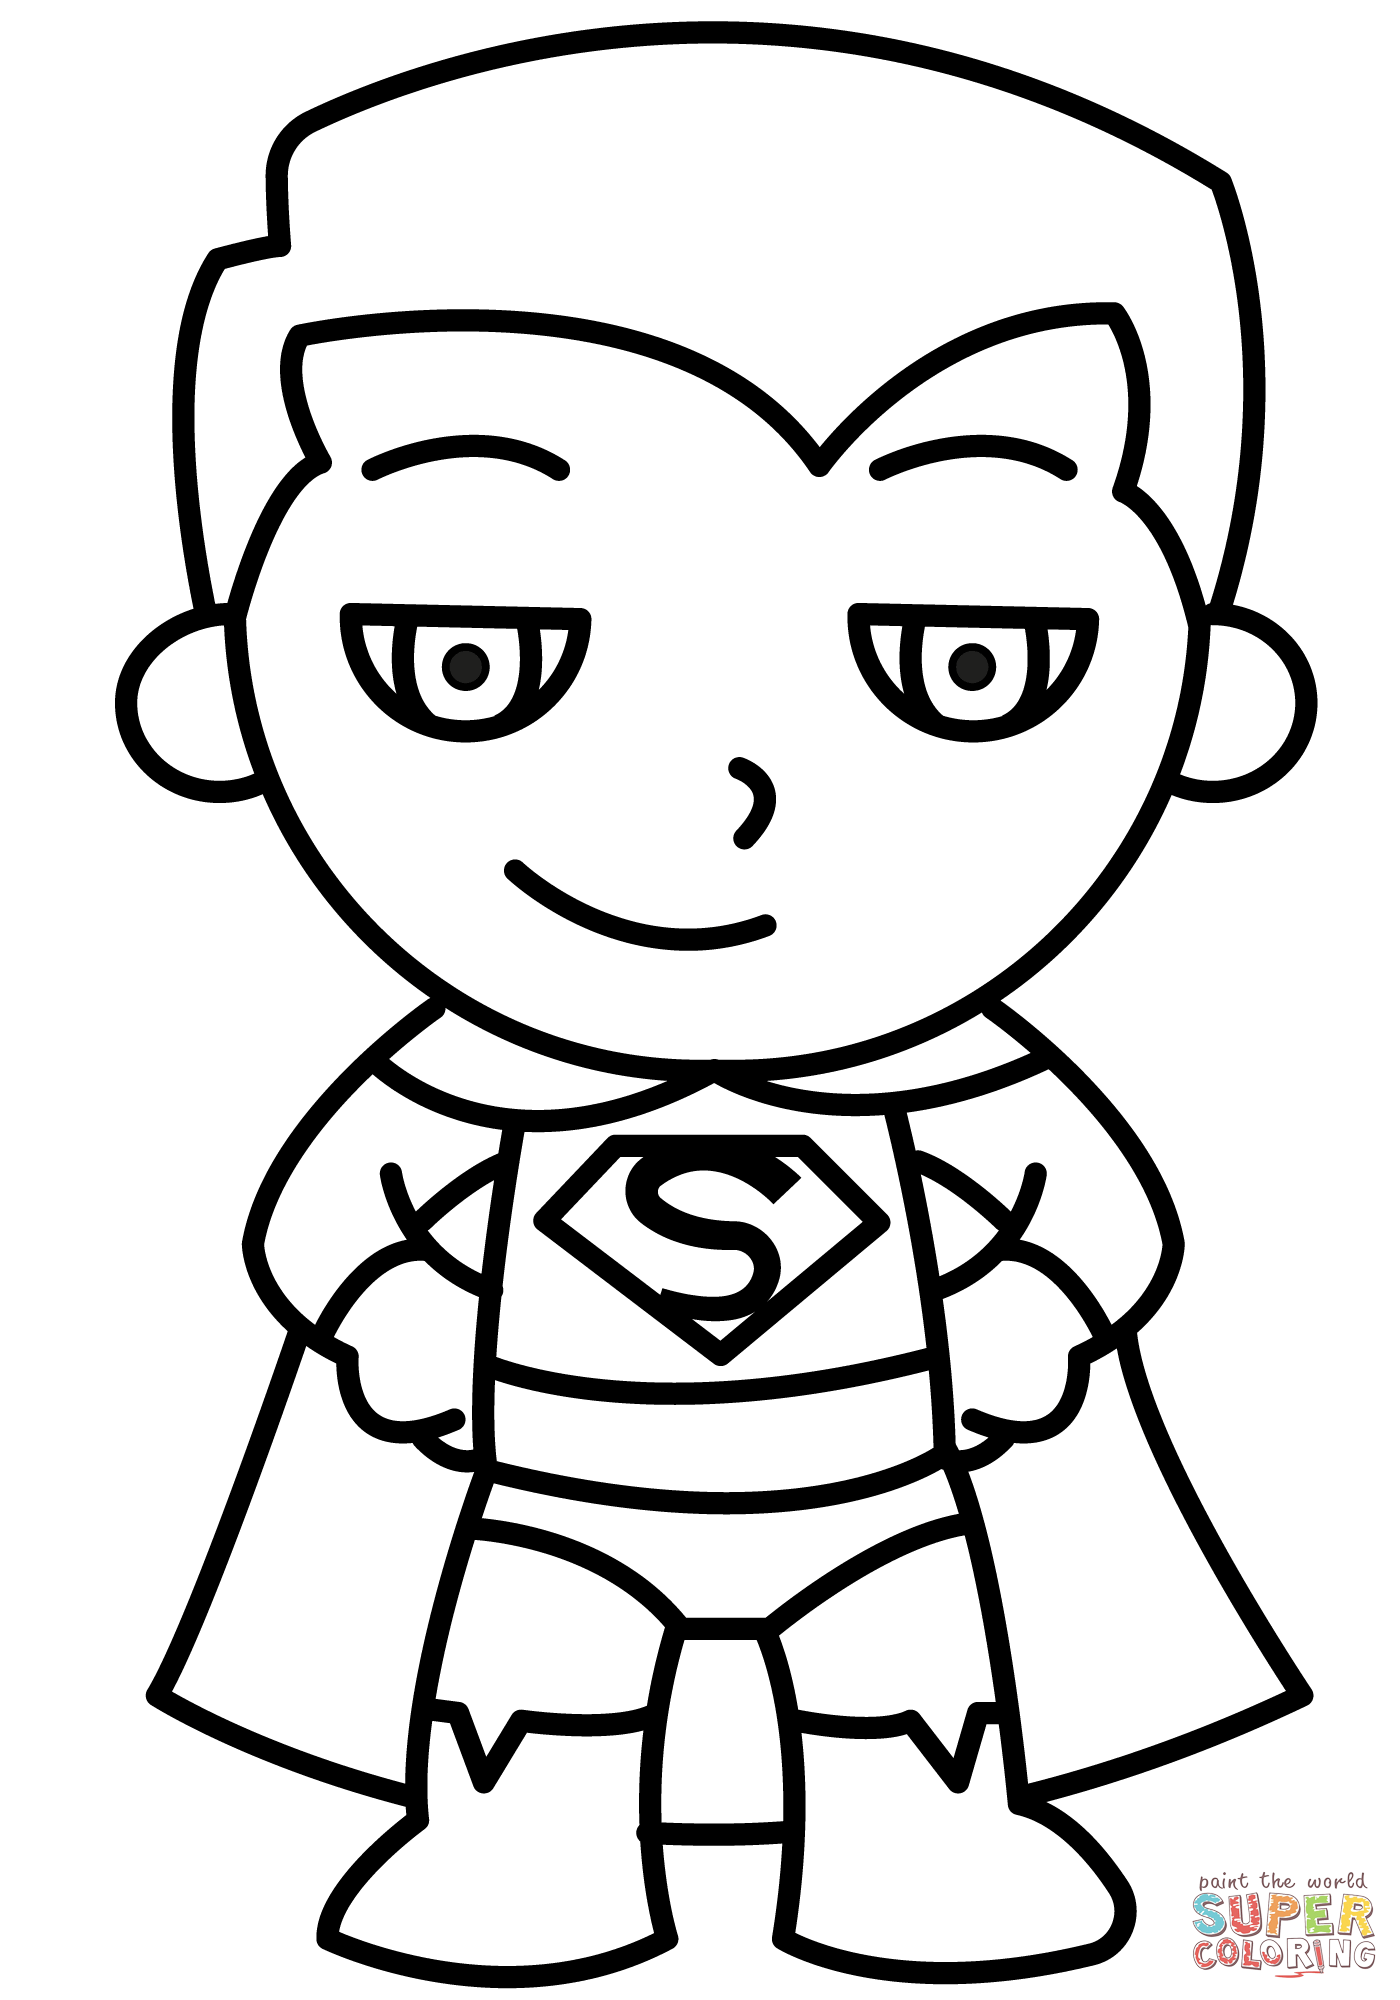 Chibi superman coloring page free printable coloring pages